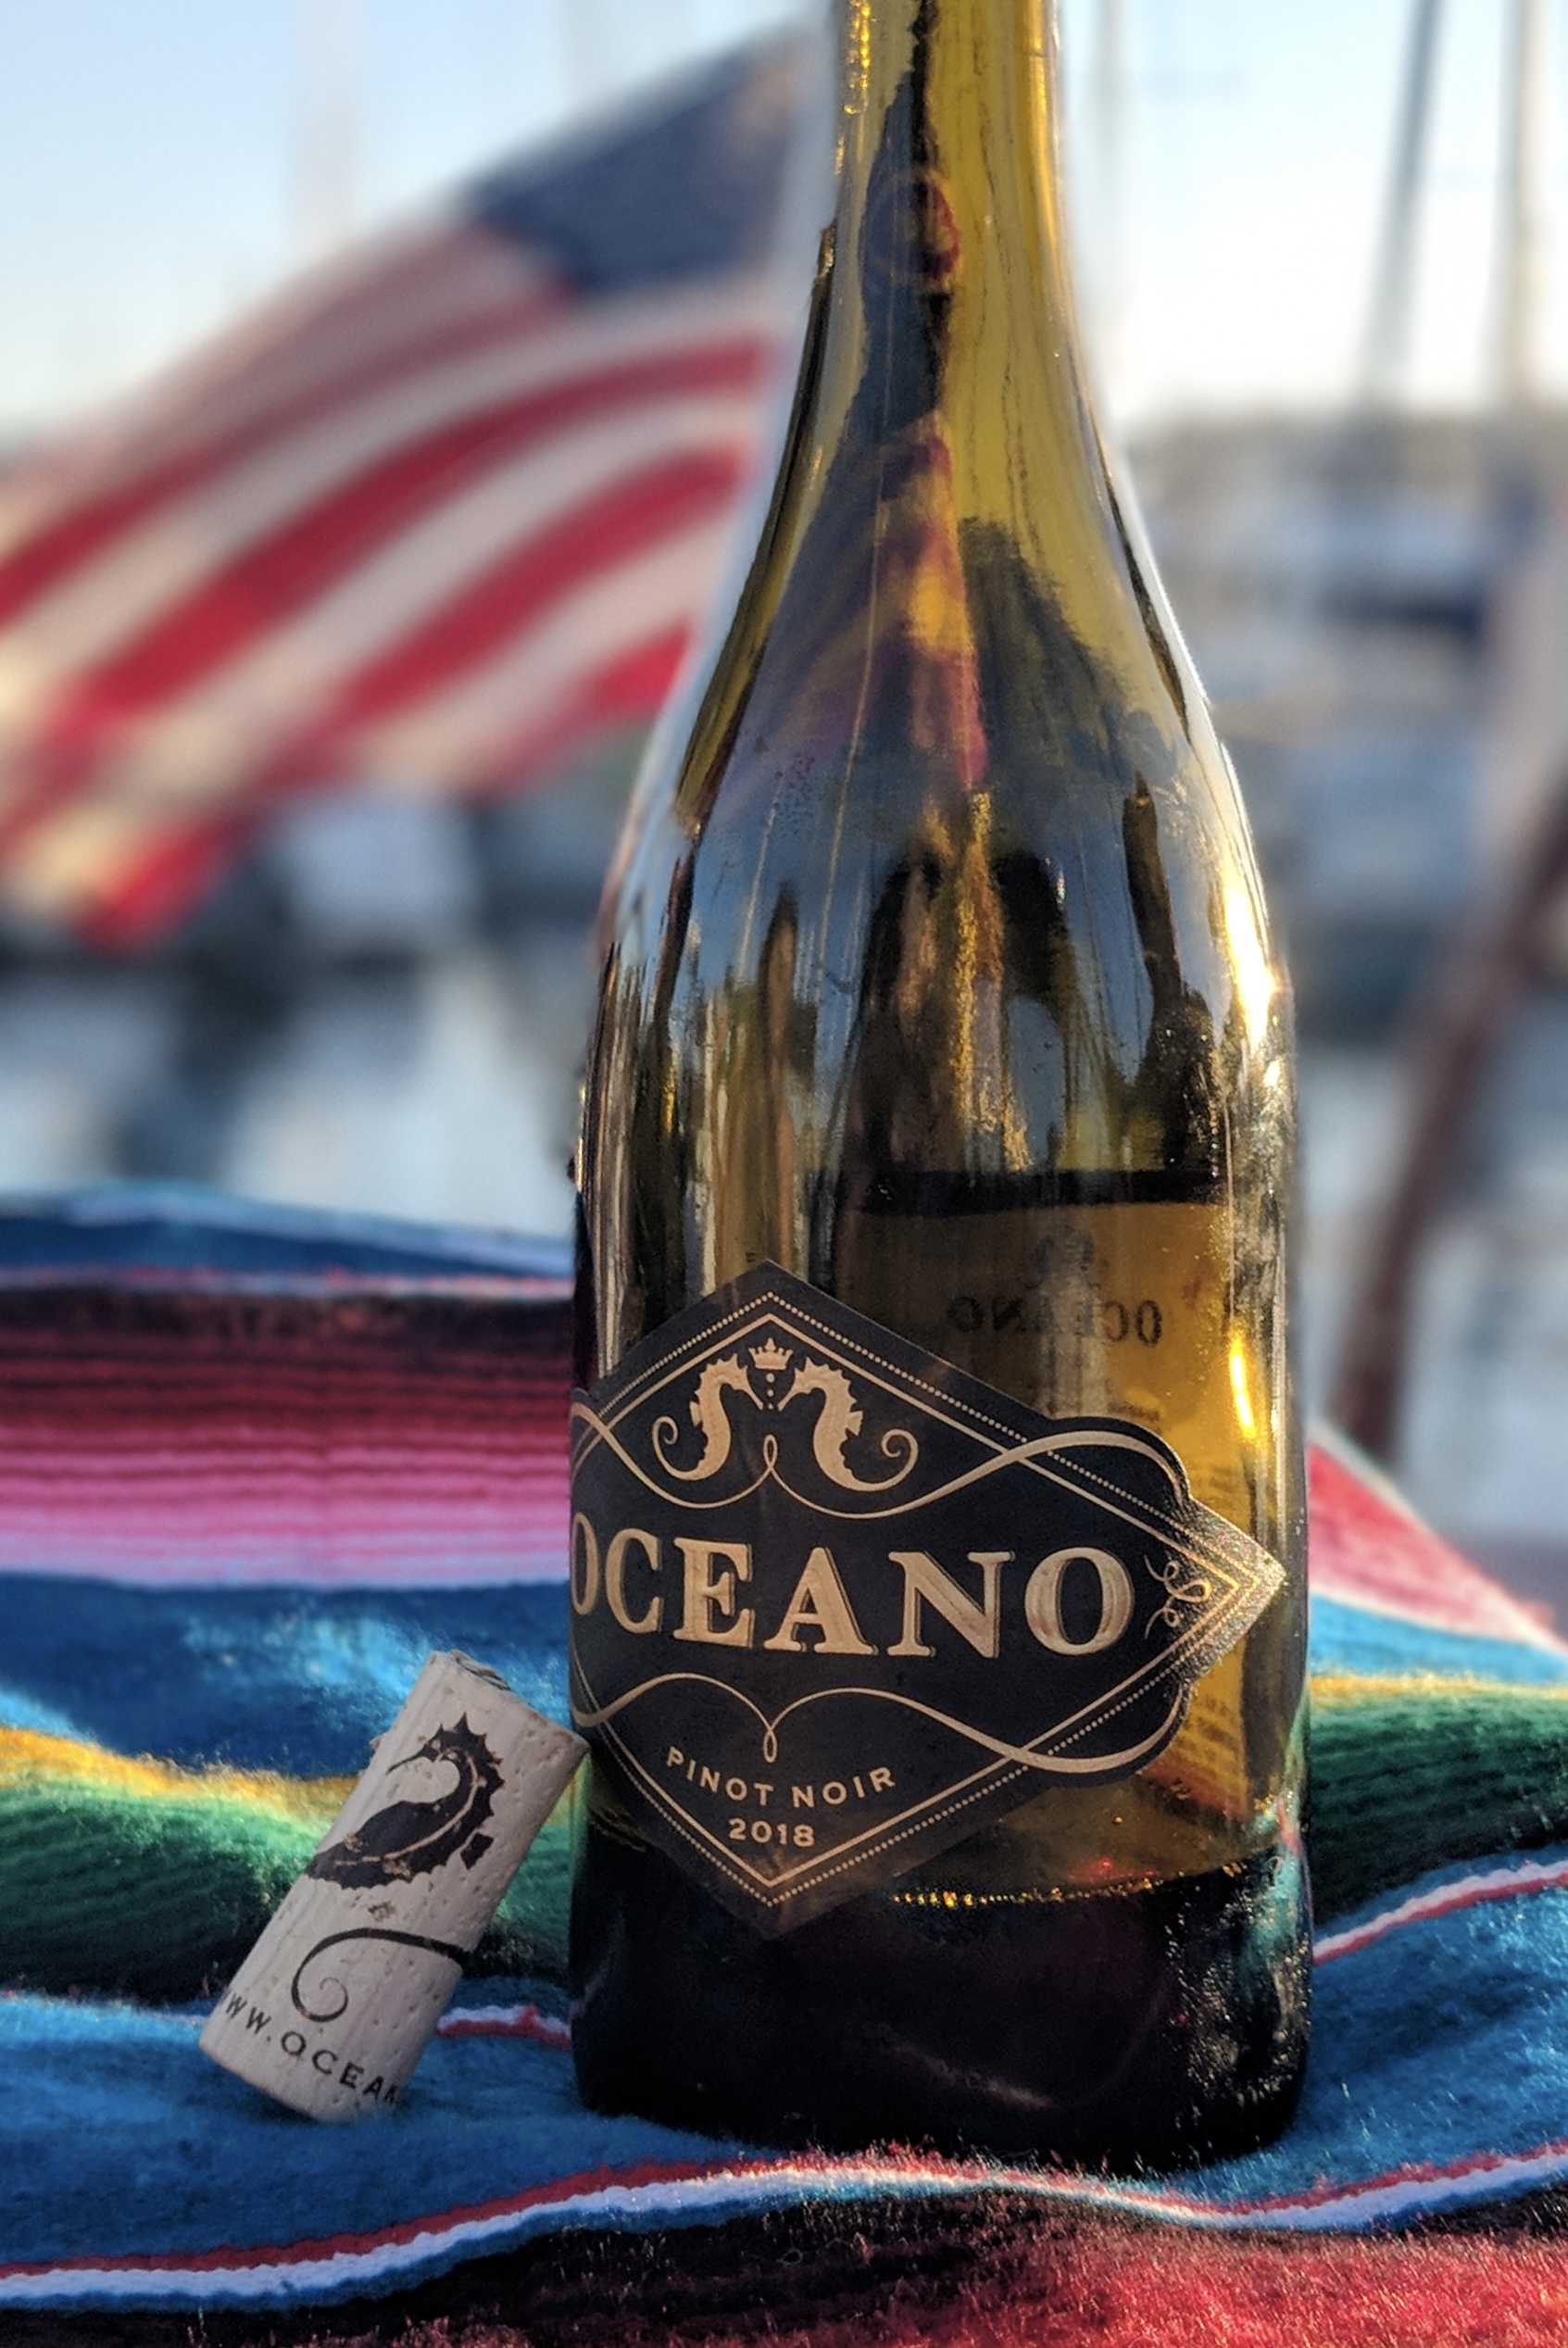 Almost empty bottle of Oceano Pinot Noir with cork leaning against the base